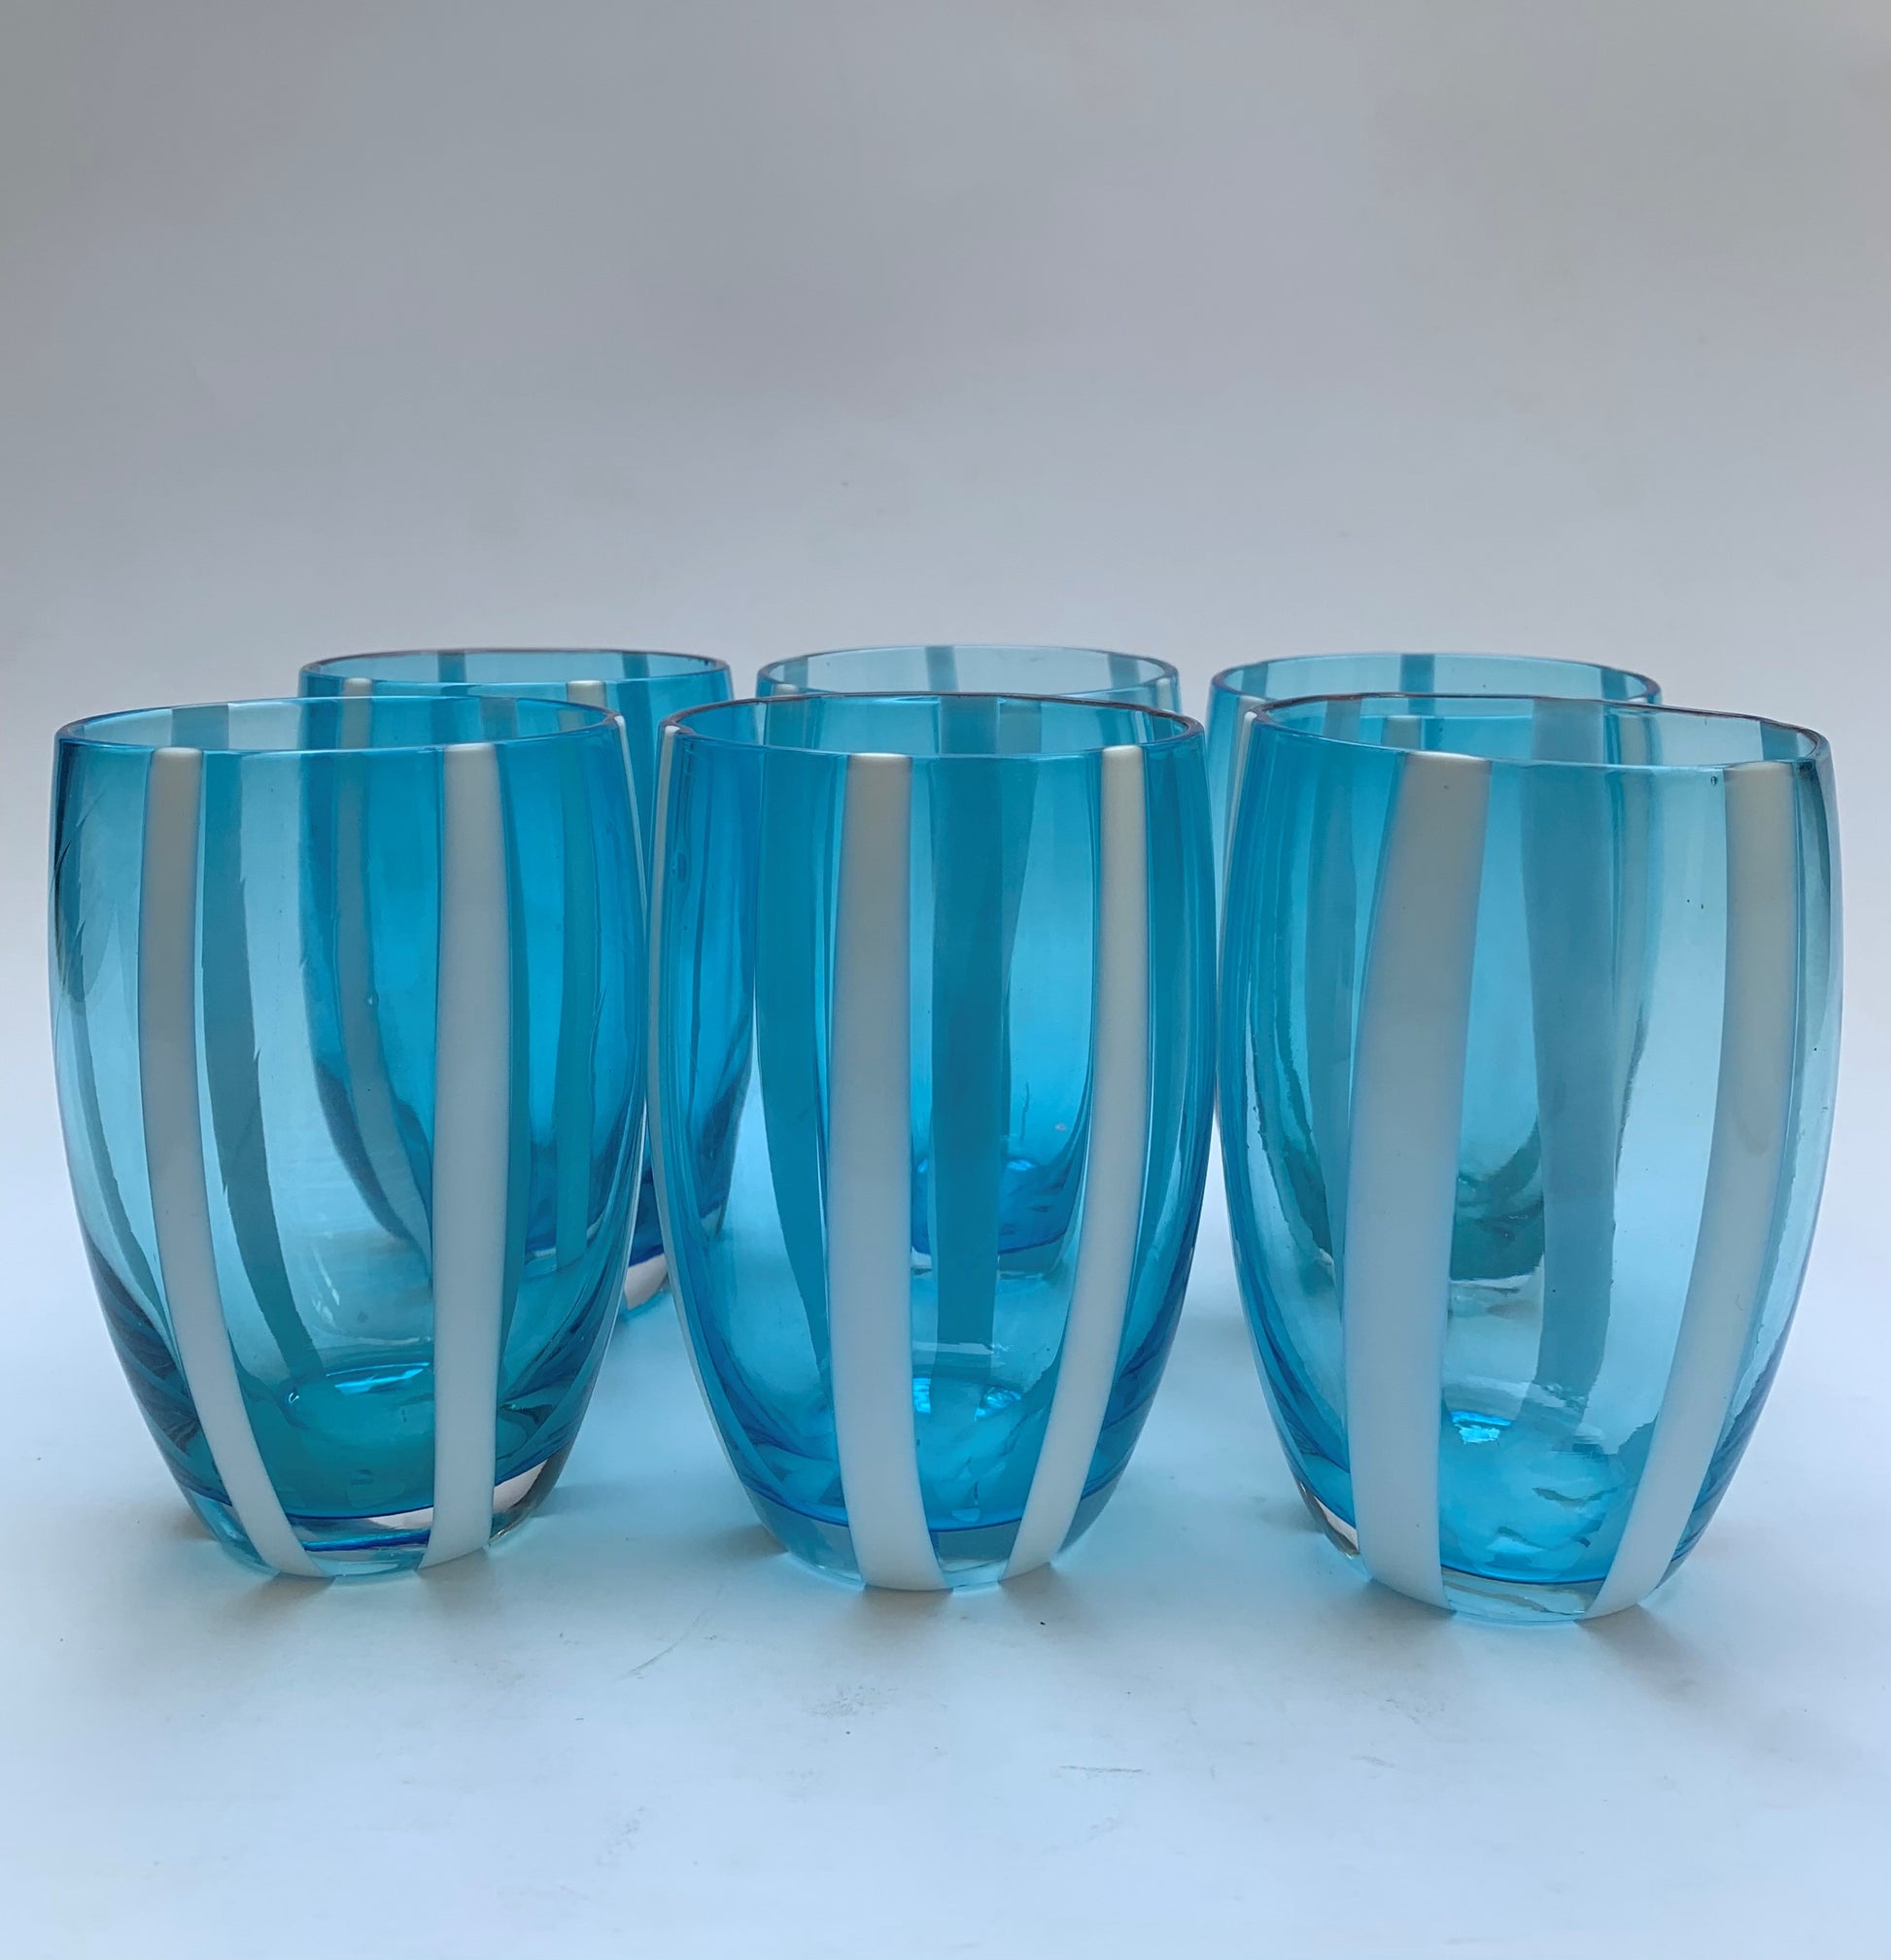 aqua blue glass tumblers with hand-painted white stripes